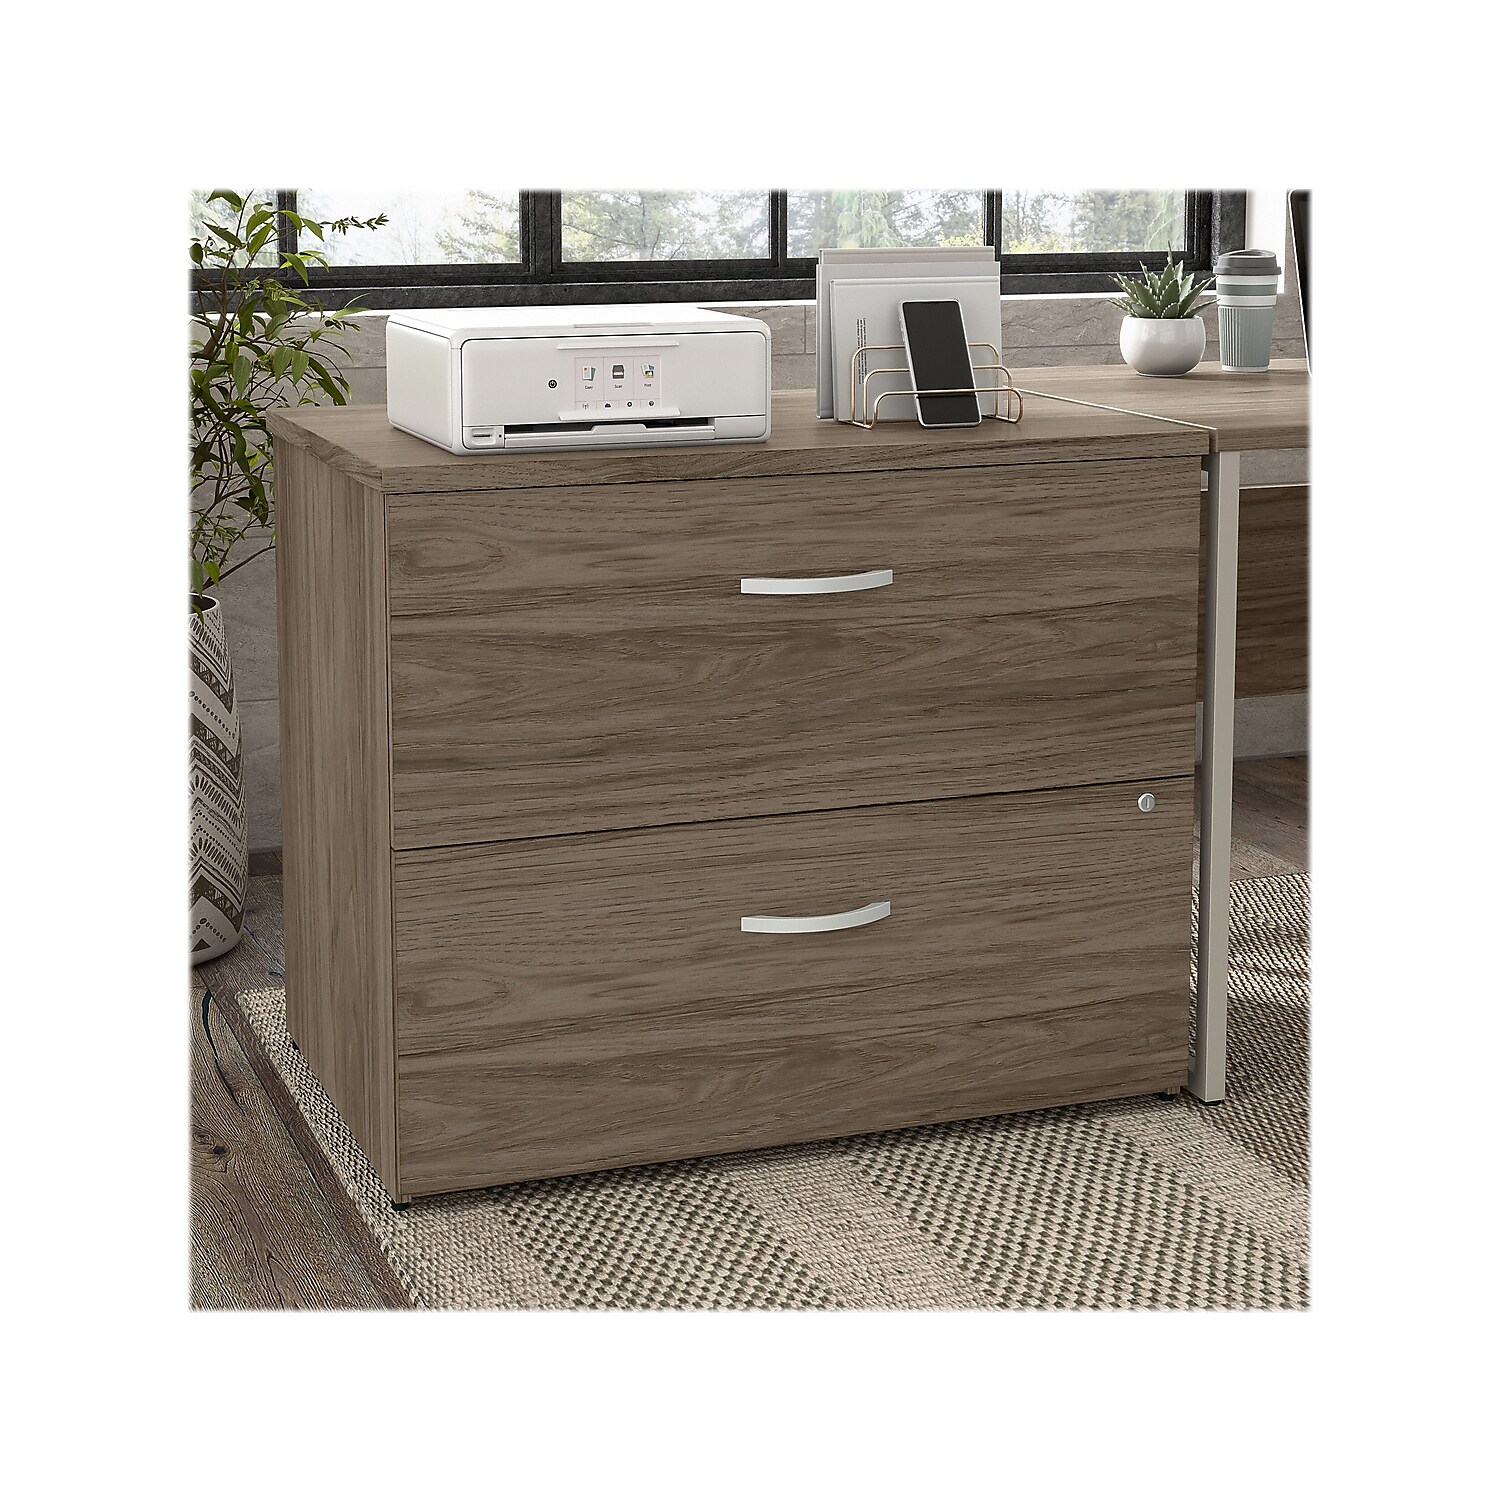 Hybrid 2 Drawer Lateral File Cabinet in Modern Hickory - Engineered Wood - image 2 of 8